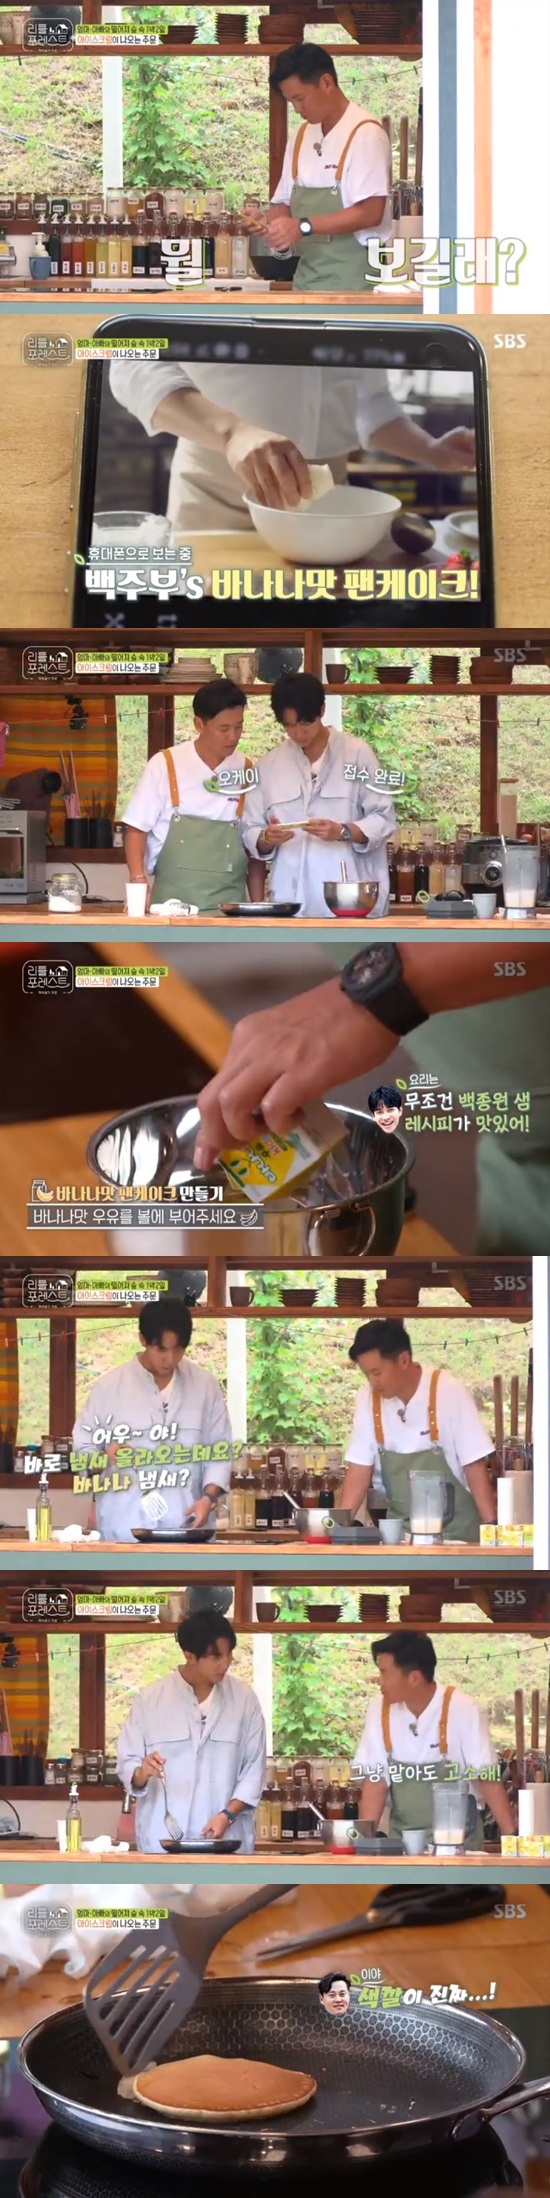 Lee Seo-jin Lee Seung-gi made banana flavored pancakesLee Seo-jin Lee Seung-gi made a banana flavored pancake with childrens Snack on SBS Little Forest broadcast on September 9th.Park and Jung So-min made Ice cream with childrens Snack, followed by Lee Seo-jin looking for banana flavor pancakes on his cell phone.The video Lee Seo-jin was watching is a banana flavored pancake video by Baek Jong-won.Lee Seung-gi, who watched the video with Lee Seo-jin, said, The dish is delicious for Mr. Must.Lee Seo-jin Lee Seung-gi followed up with a recipe and put it in a pan, and admired it as smelling right away and just taking it.Yoo Gyeong-sang